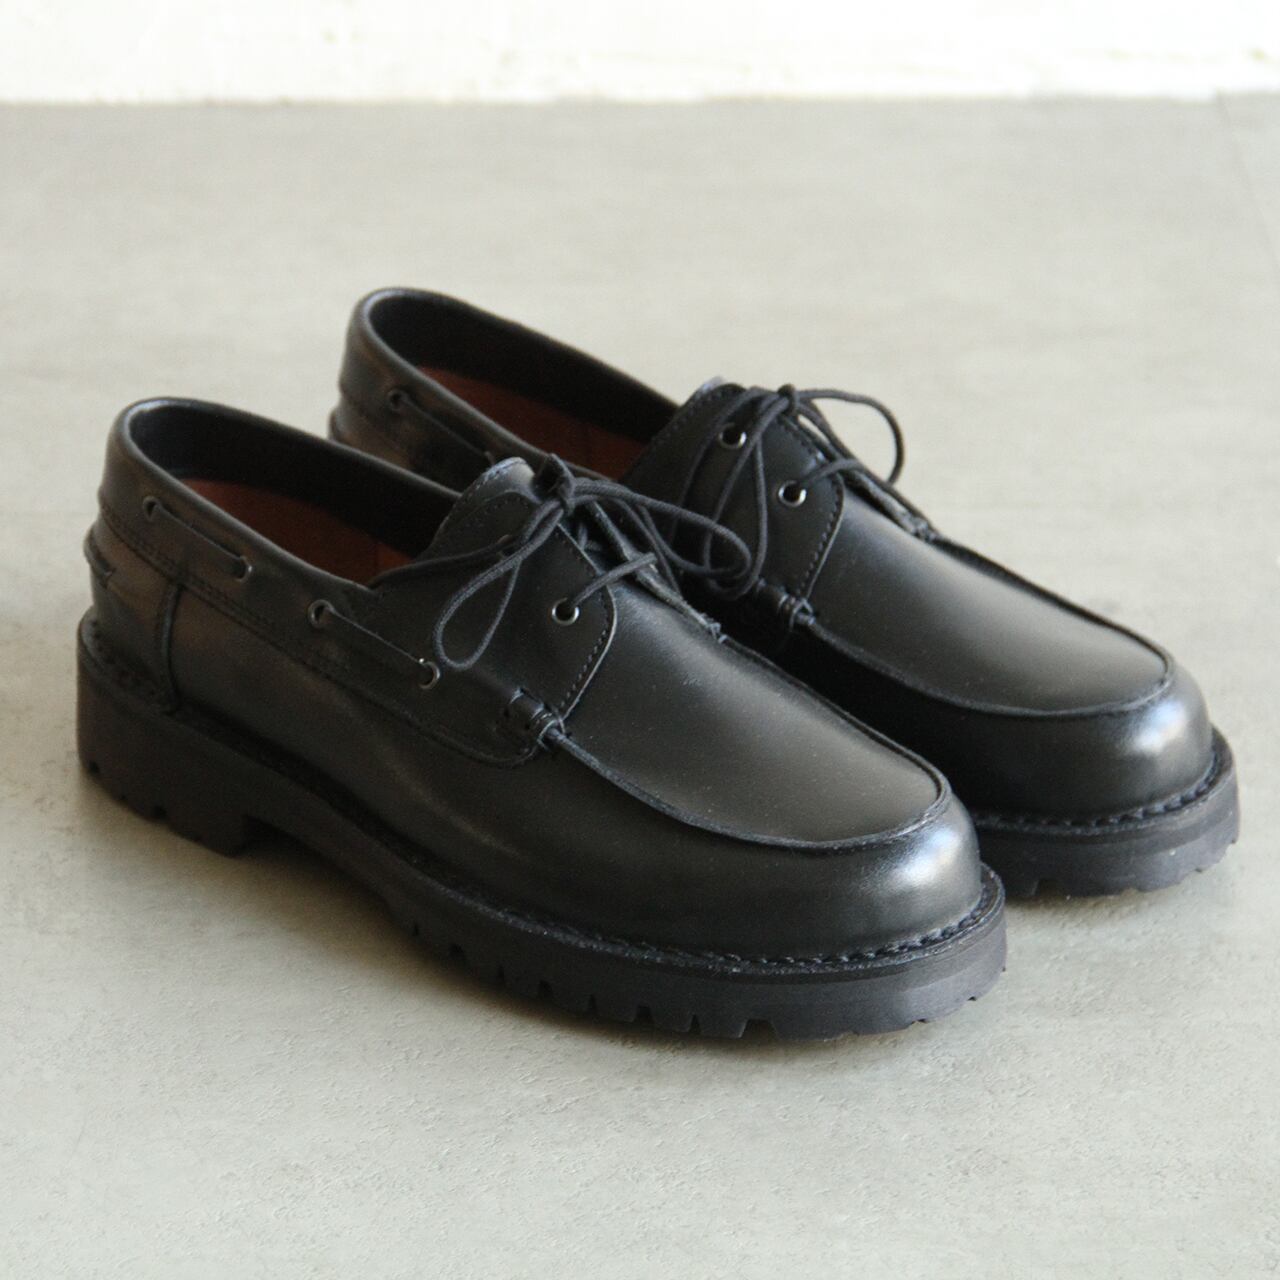 REPRODUCTION OF FOUND MILITARY Deck Shoe - デッキシューズ